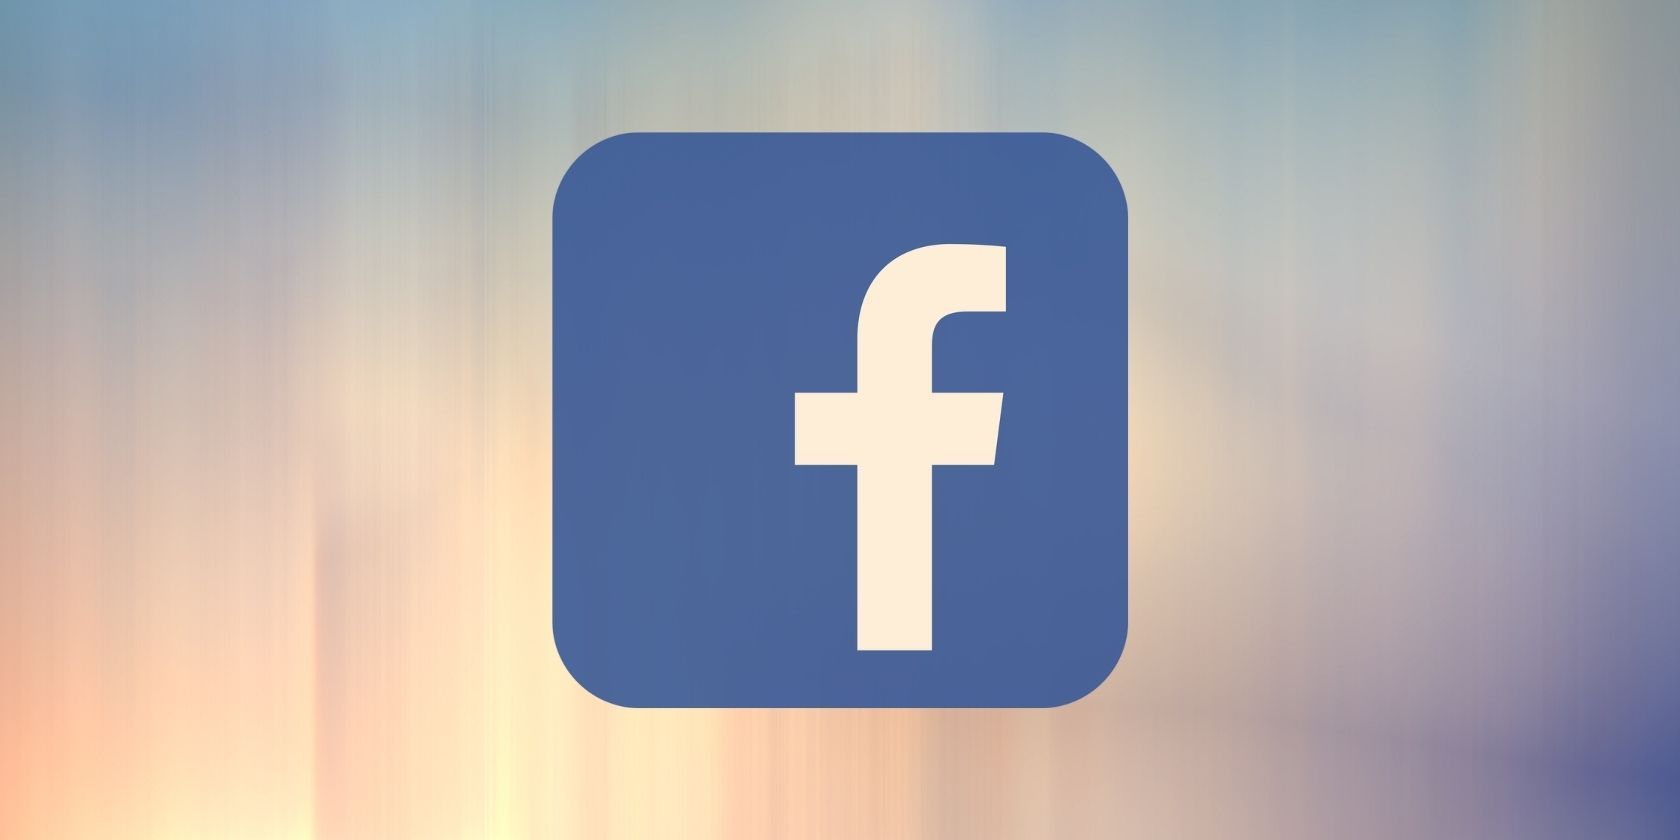 facebook logo on a multicolored pastel background